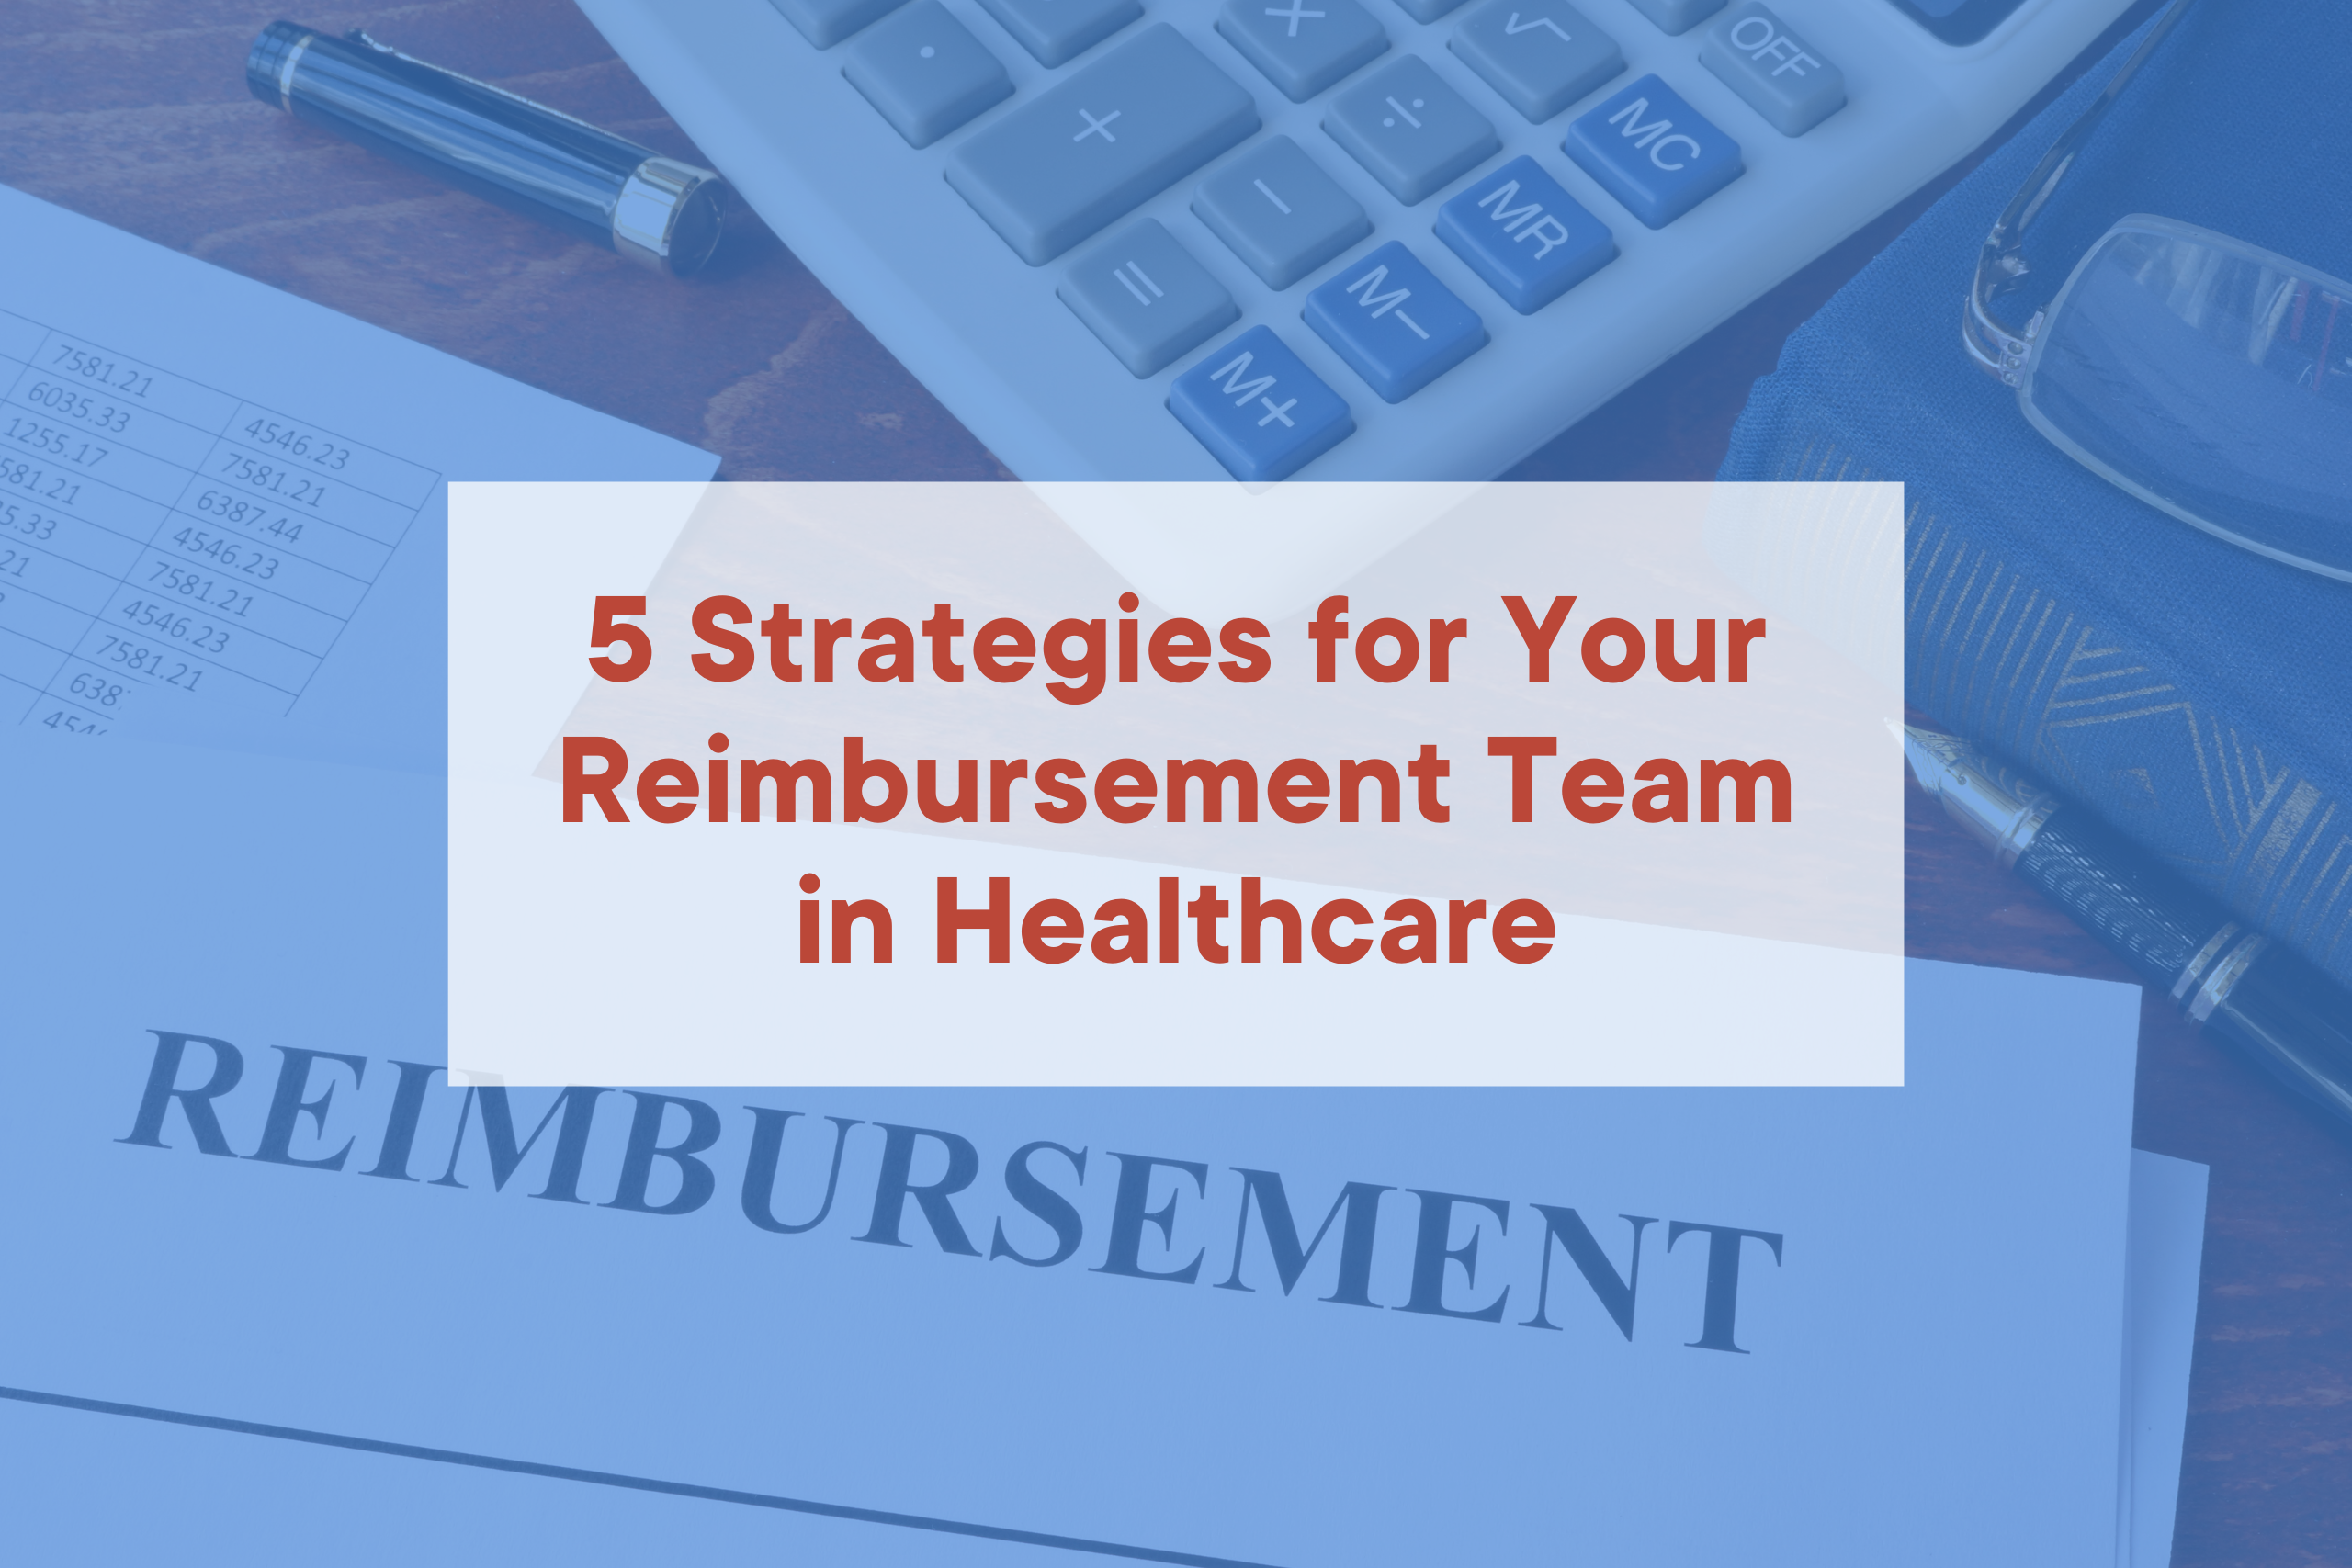 5 Ways Your Field Reimbursement Team Can Excel in the Current Healthcare Landscape